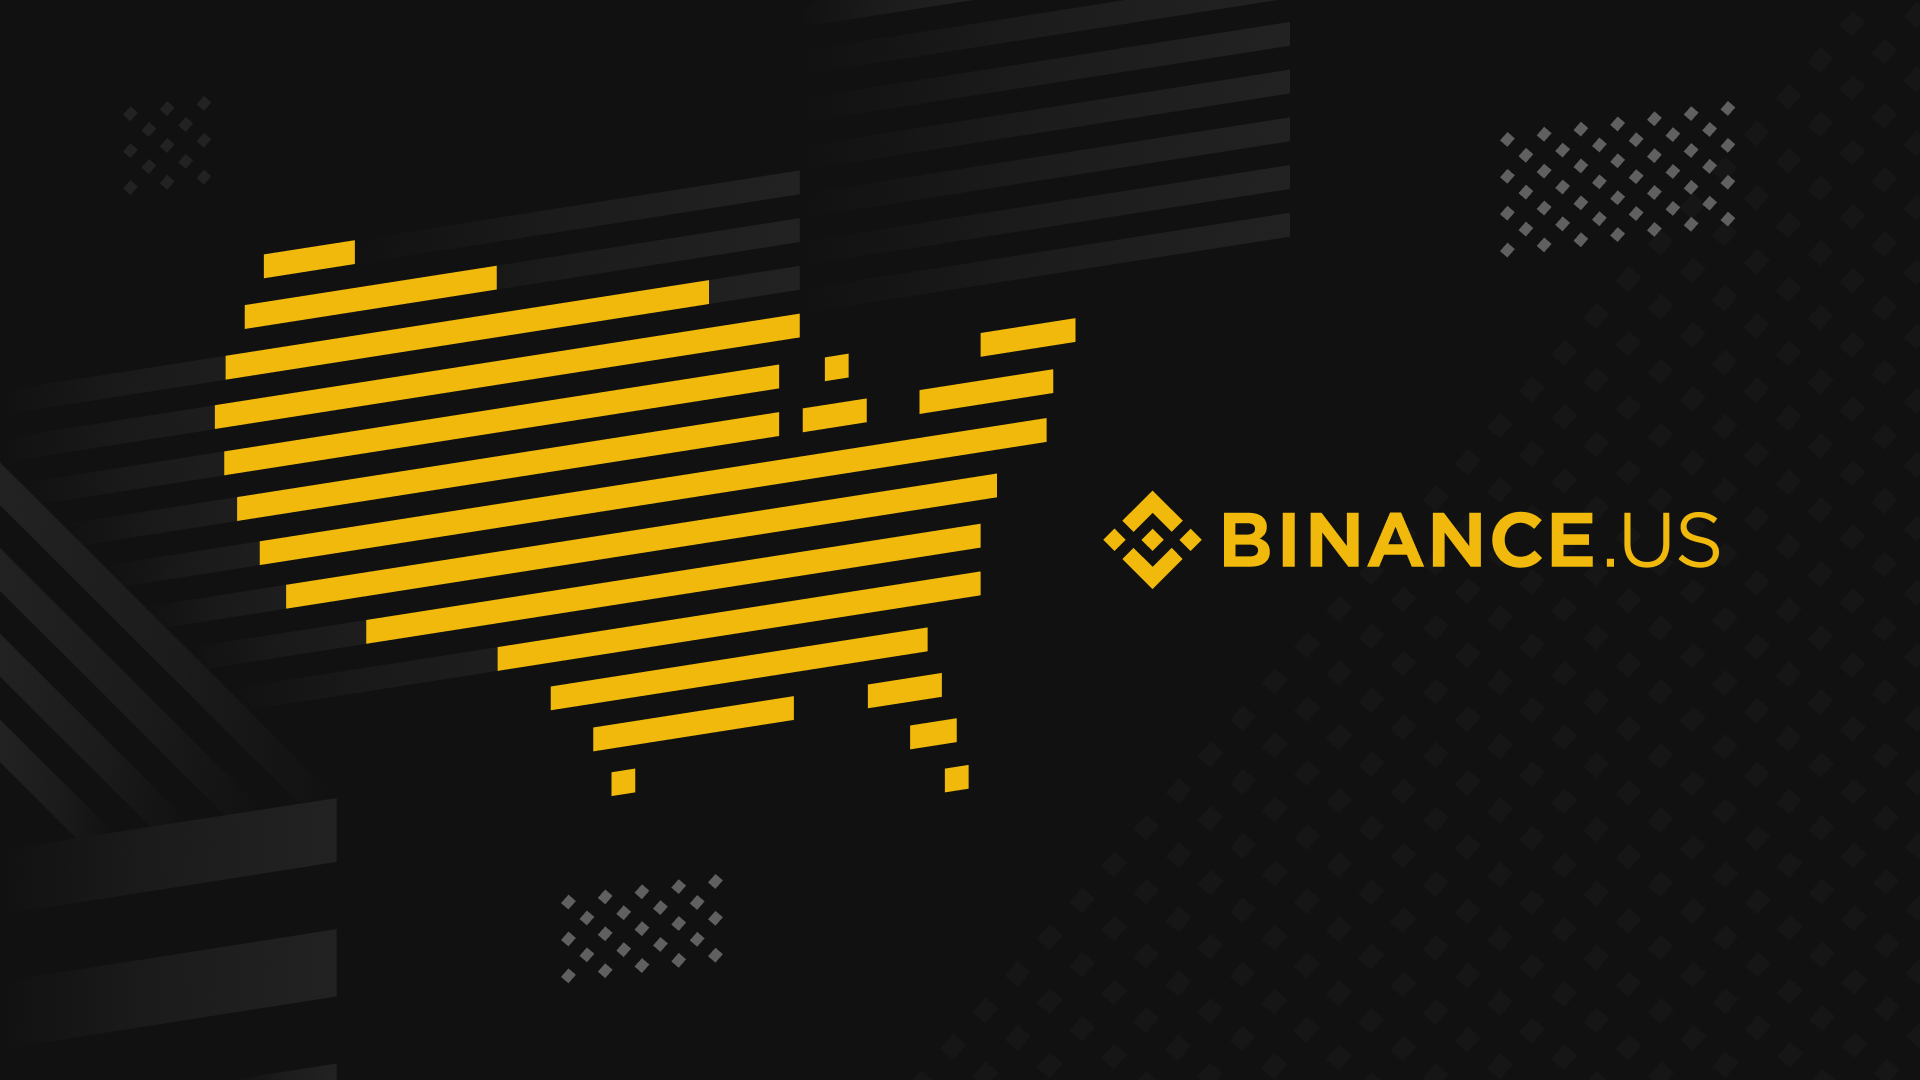 Binance.US still wants to raise $ 100 million to fulfill its IPO ambition despite legal troubles